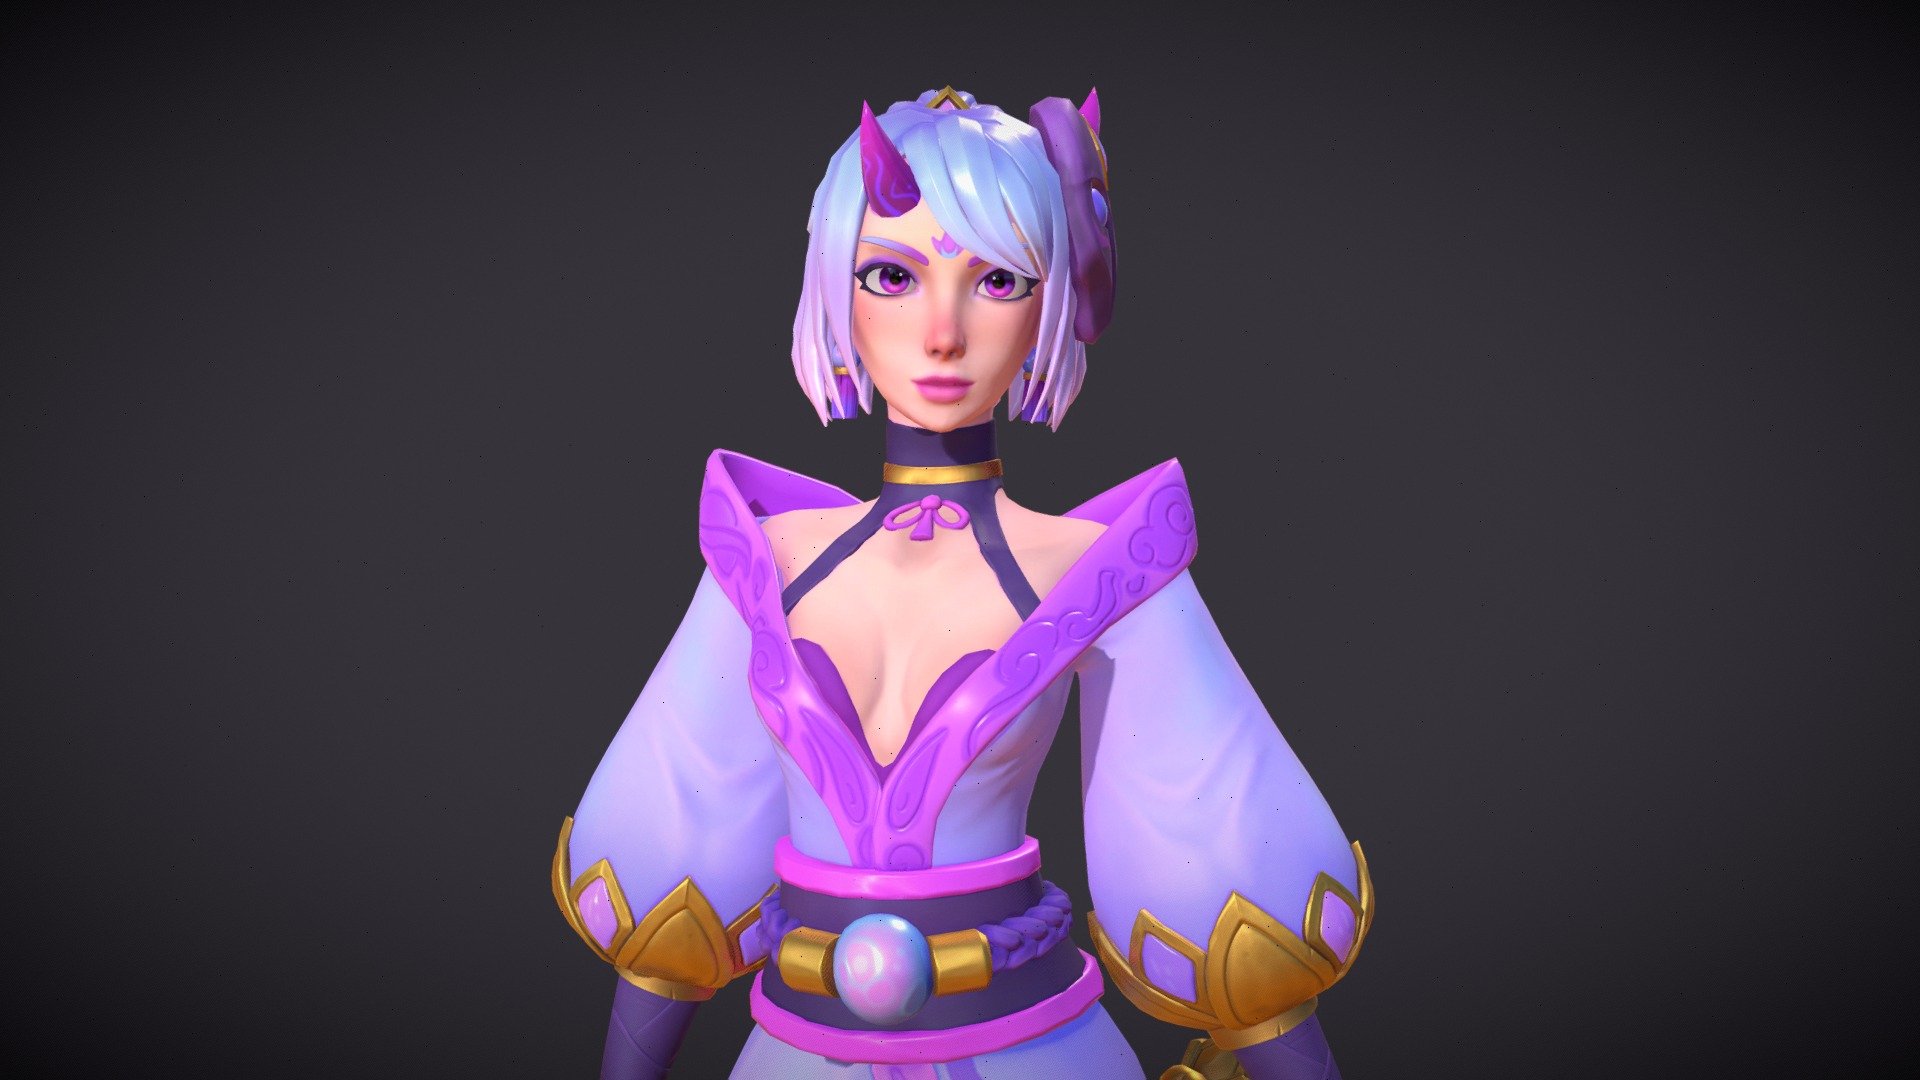 This is Spirit Blossom Lux, my entry for Search for a Star 2023!
Based on this model: https://www.artstation.com/artwork/yJzz88 - Spirit Blossom Lux - 3D model by natela 3d model